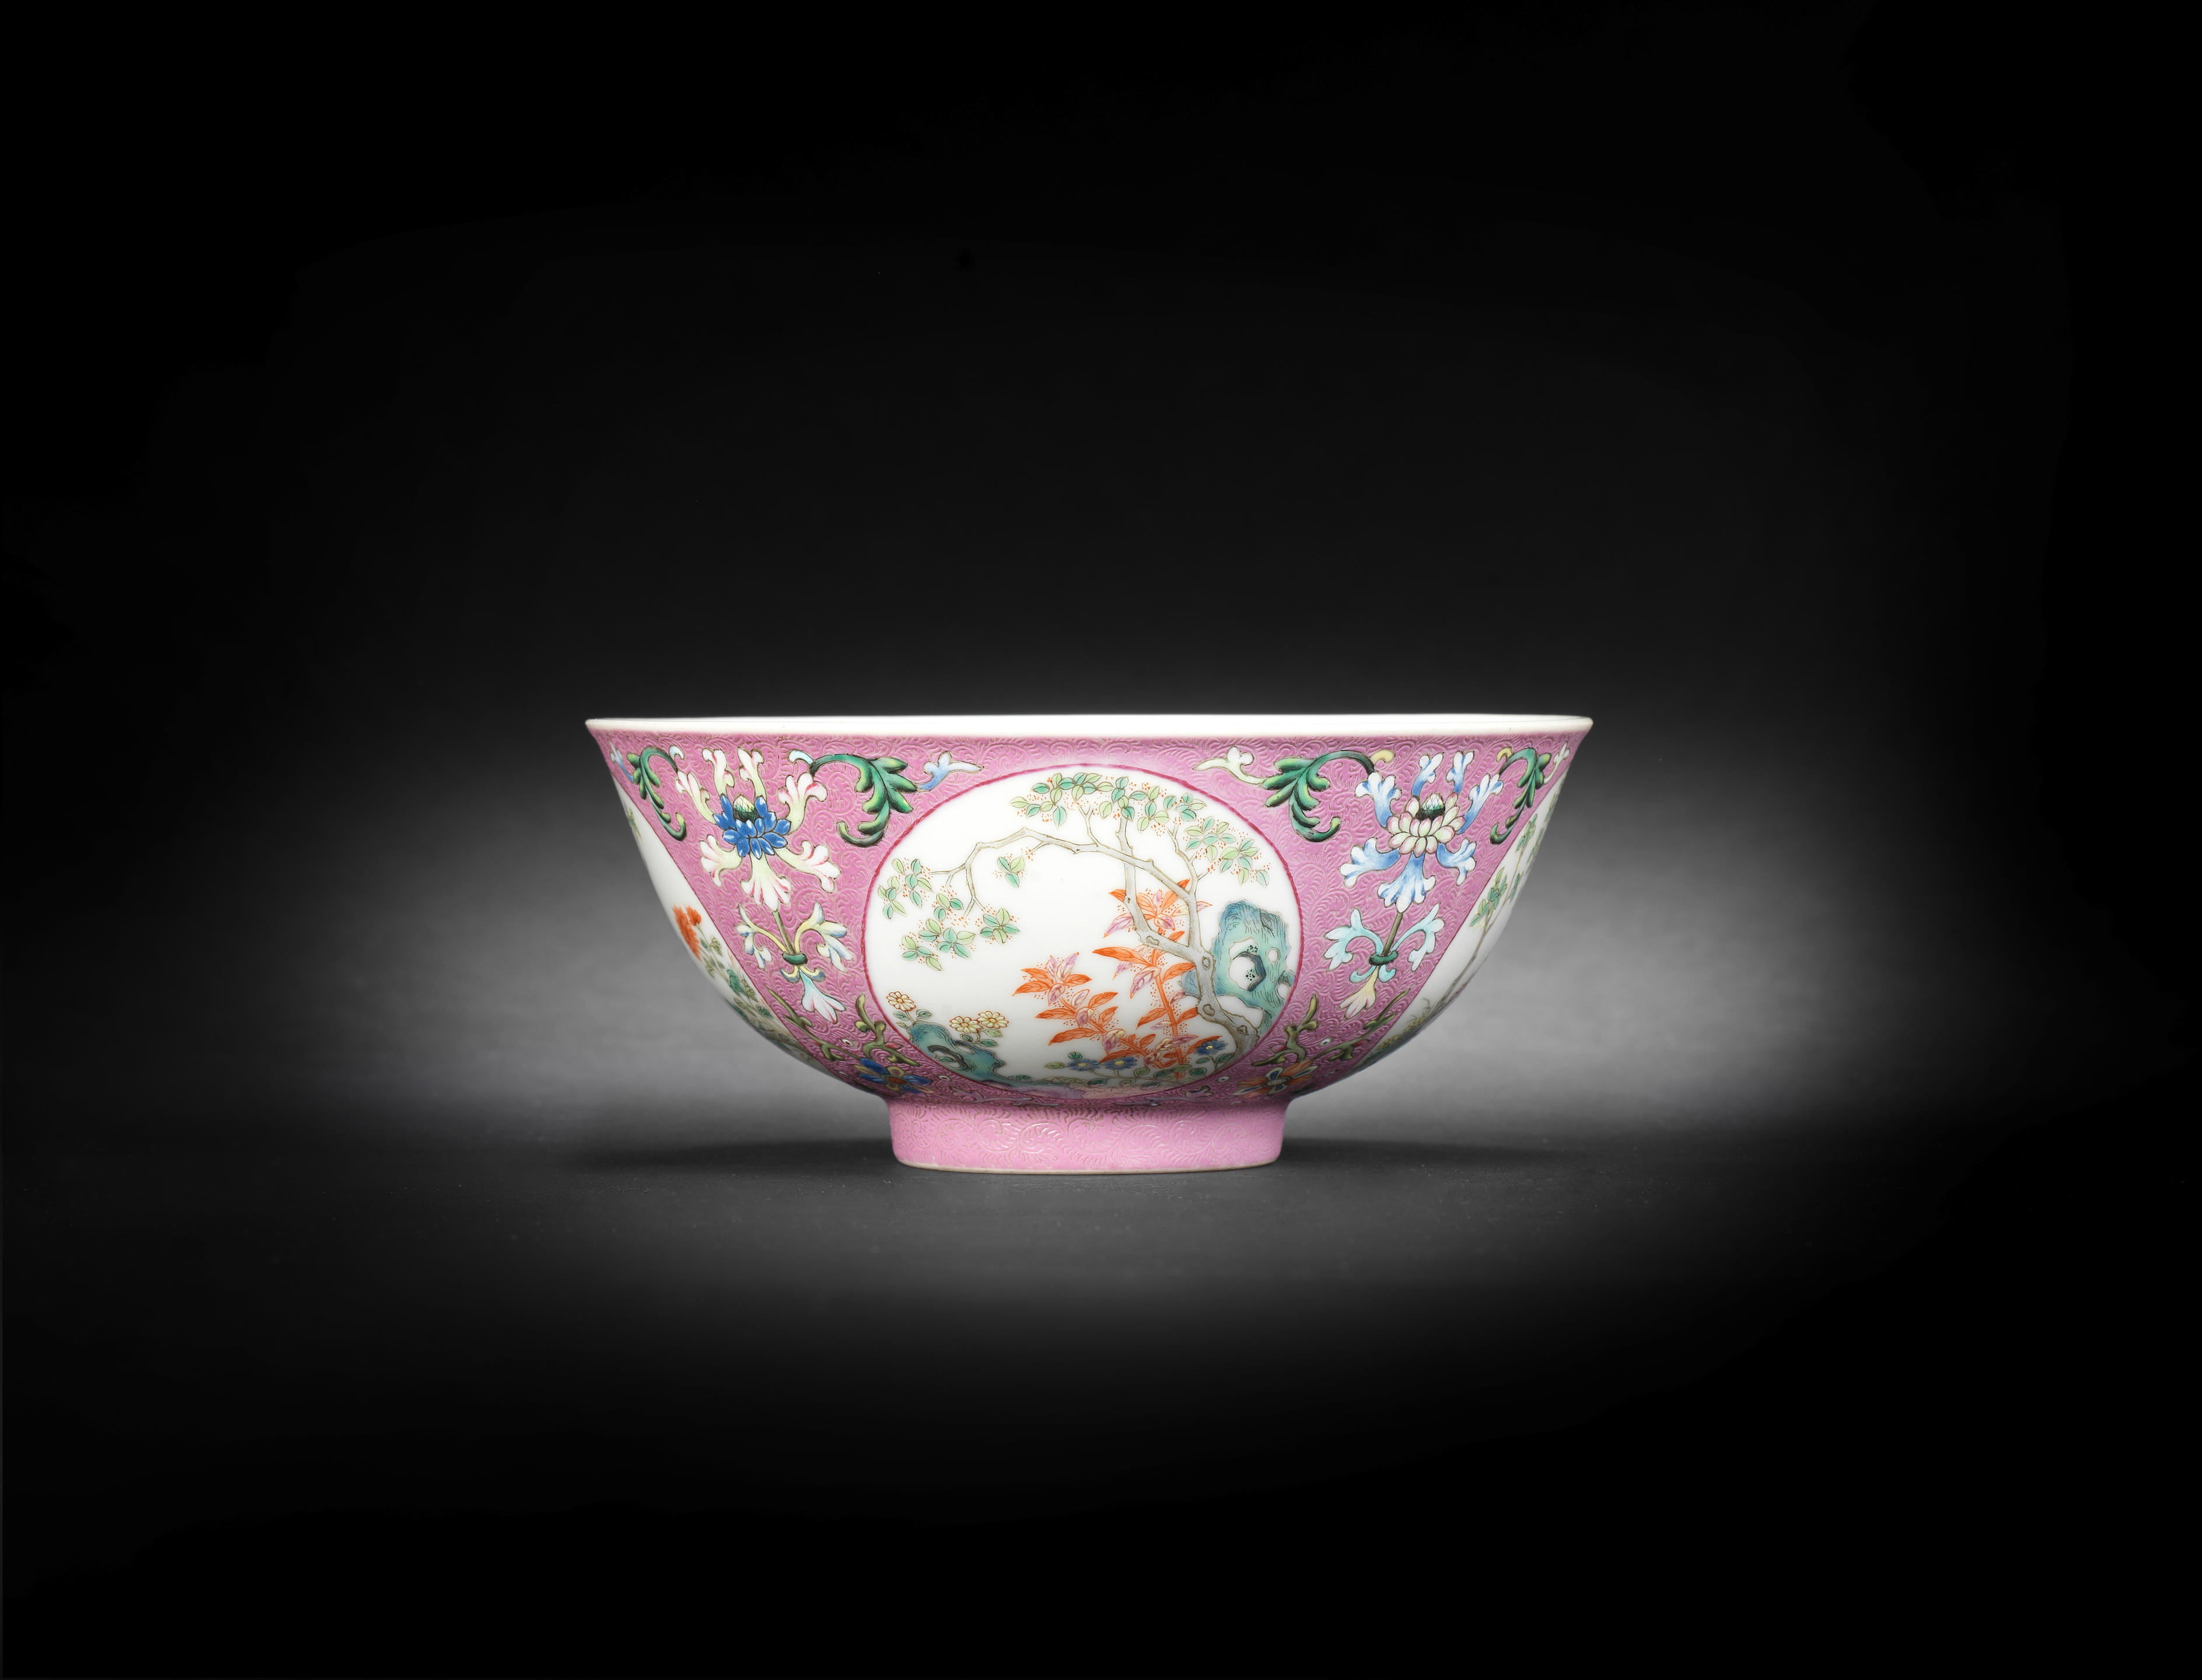 Thomas by Rosenthal Medaillon White Covered Vegetable Bowl - The Pink Daisy